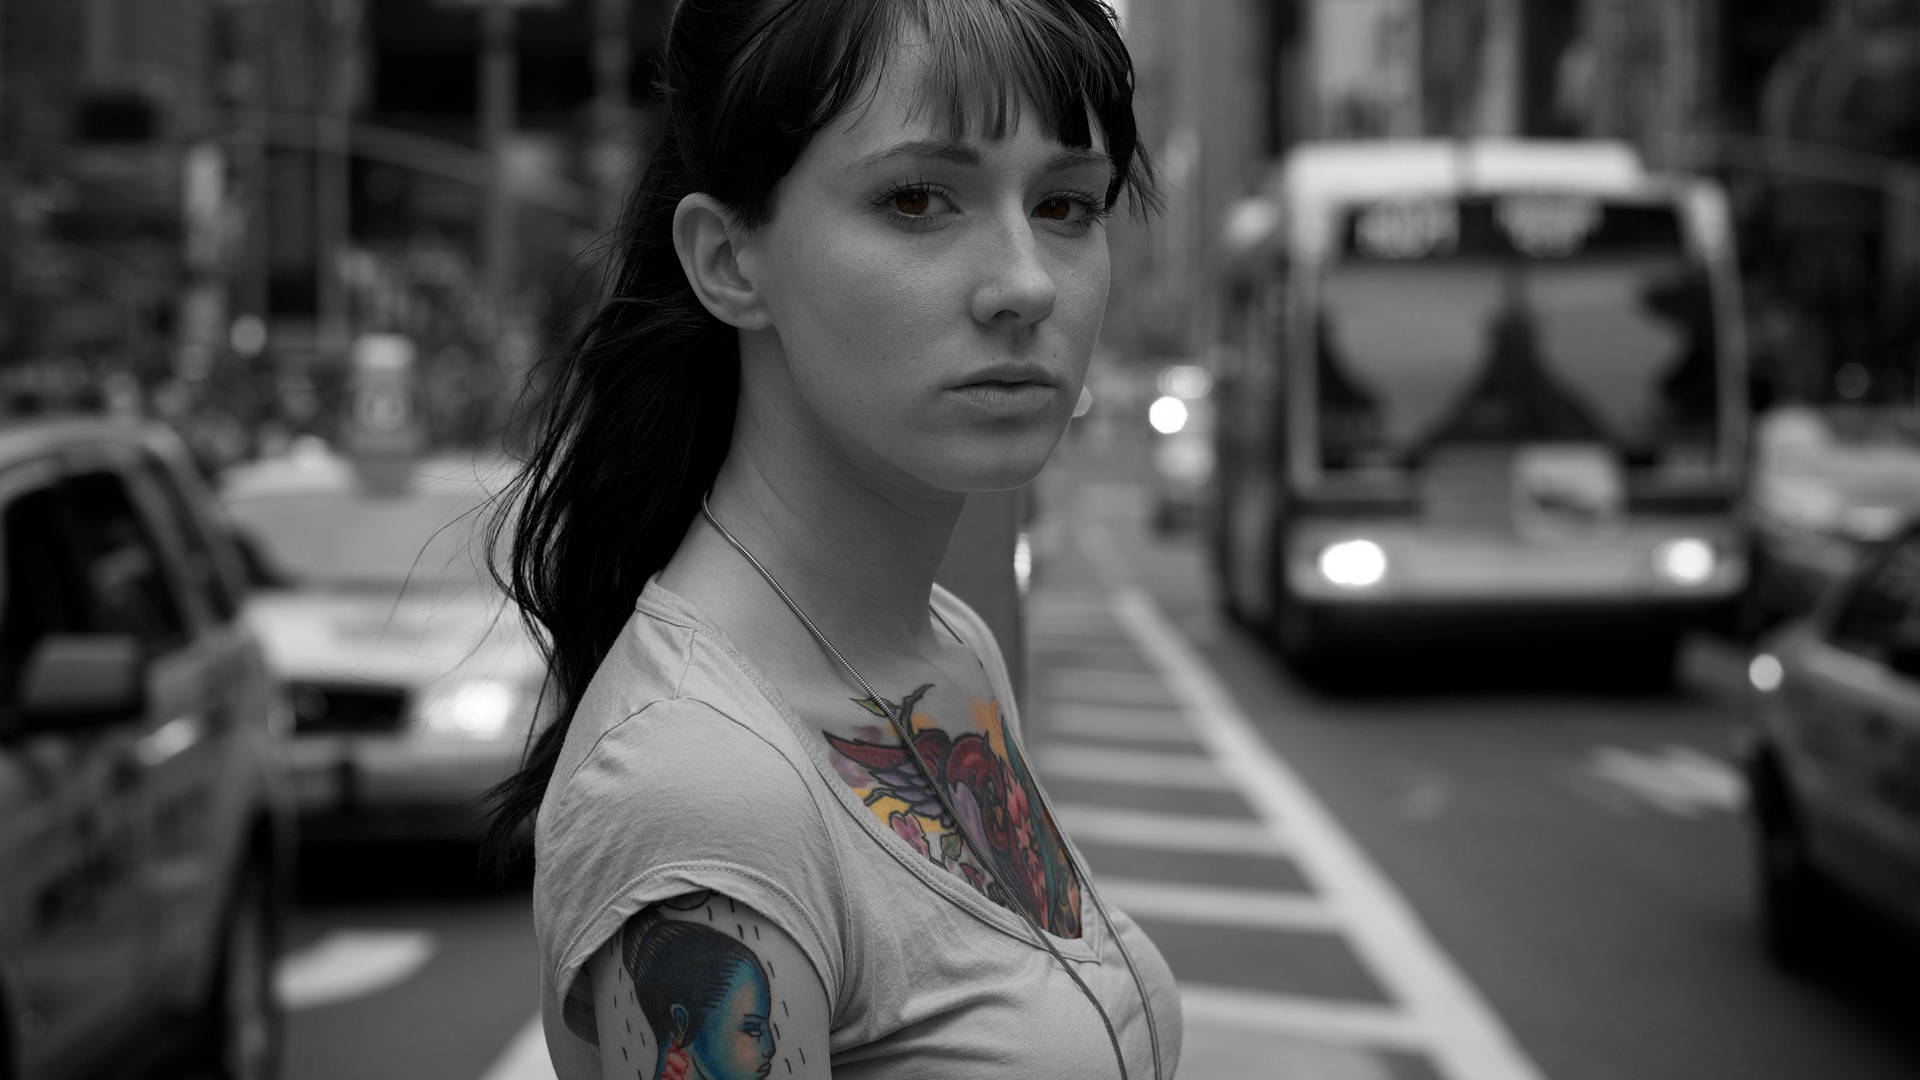 Tattooed Women On Time Square Nyc Background